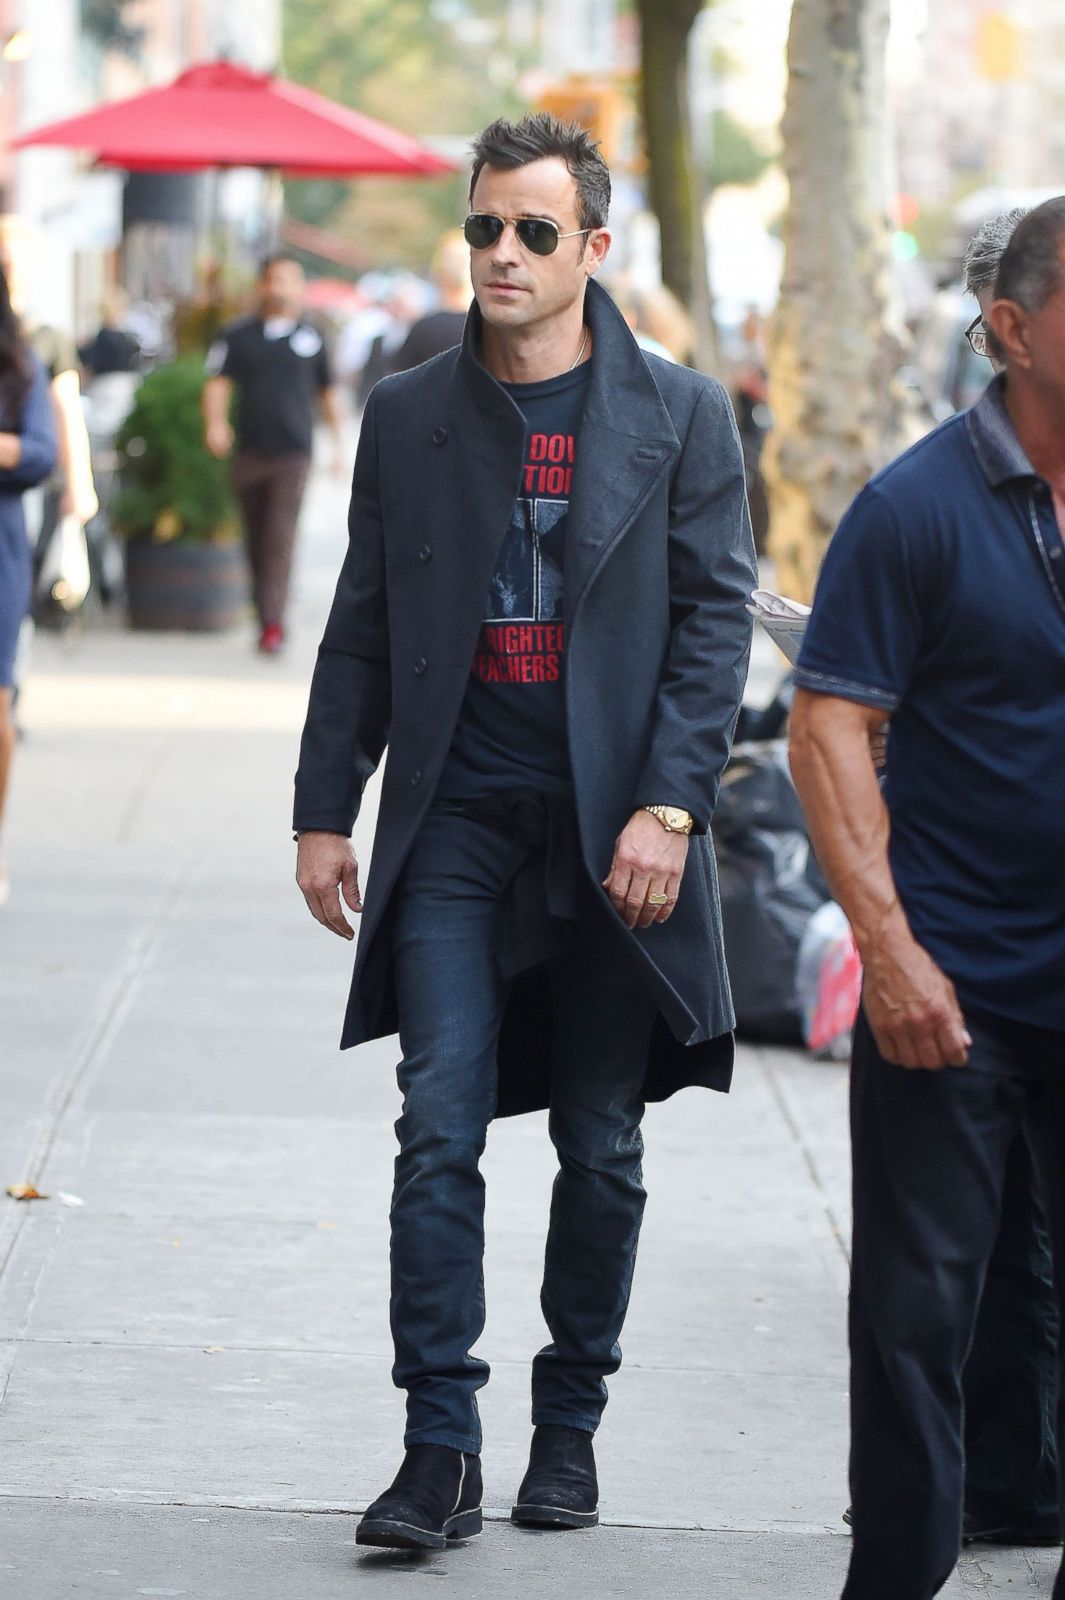 Fabrikant Baron velordnet How to wear casually wear Chelsea Boots? : r/malefashionadvice